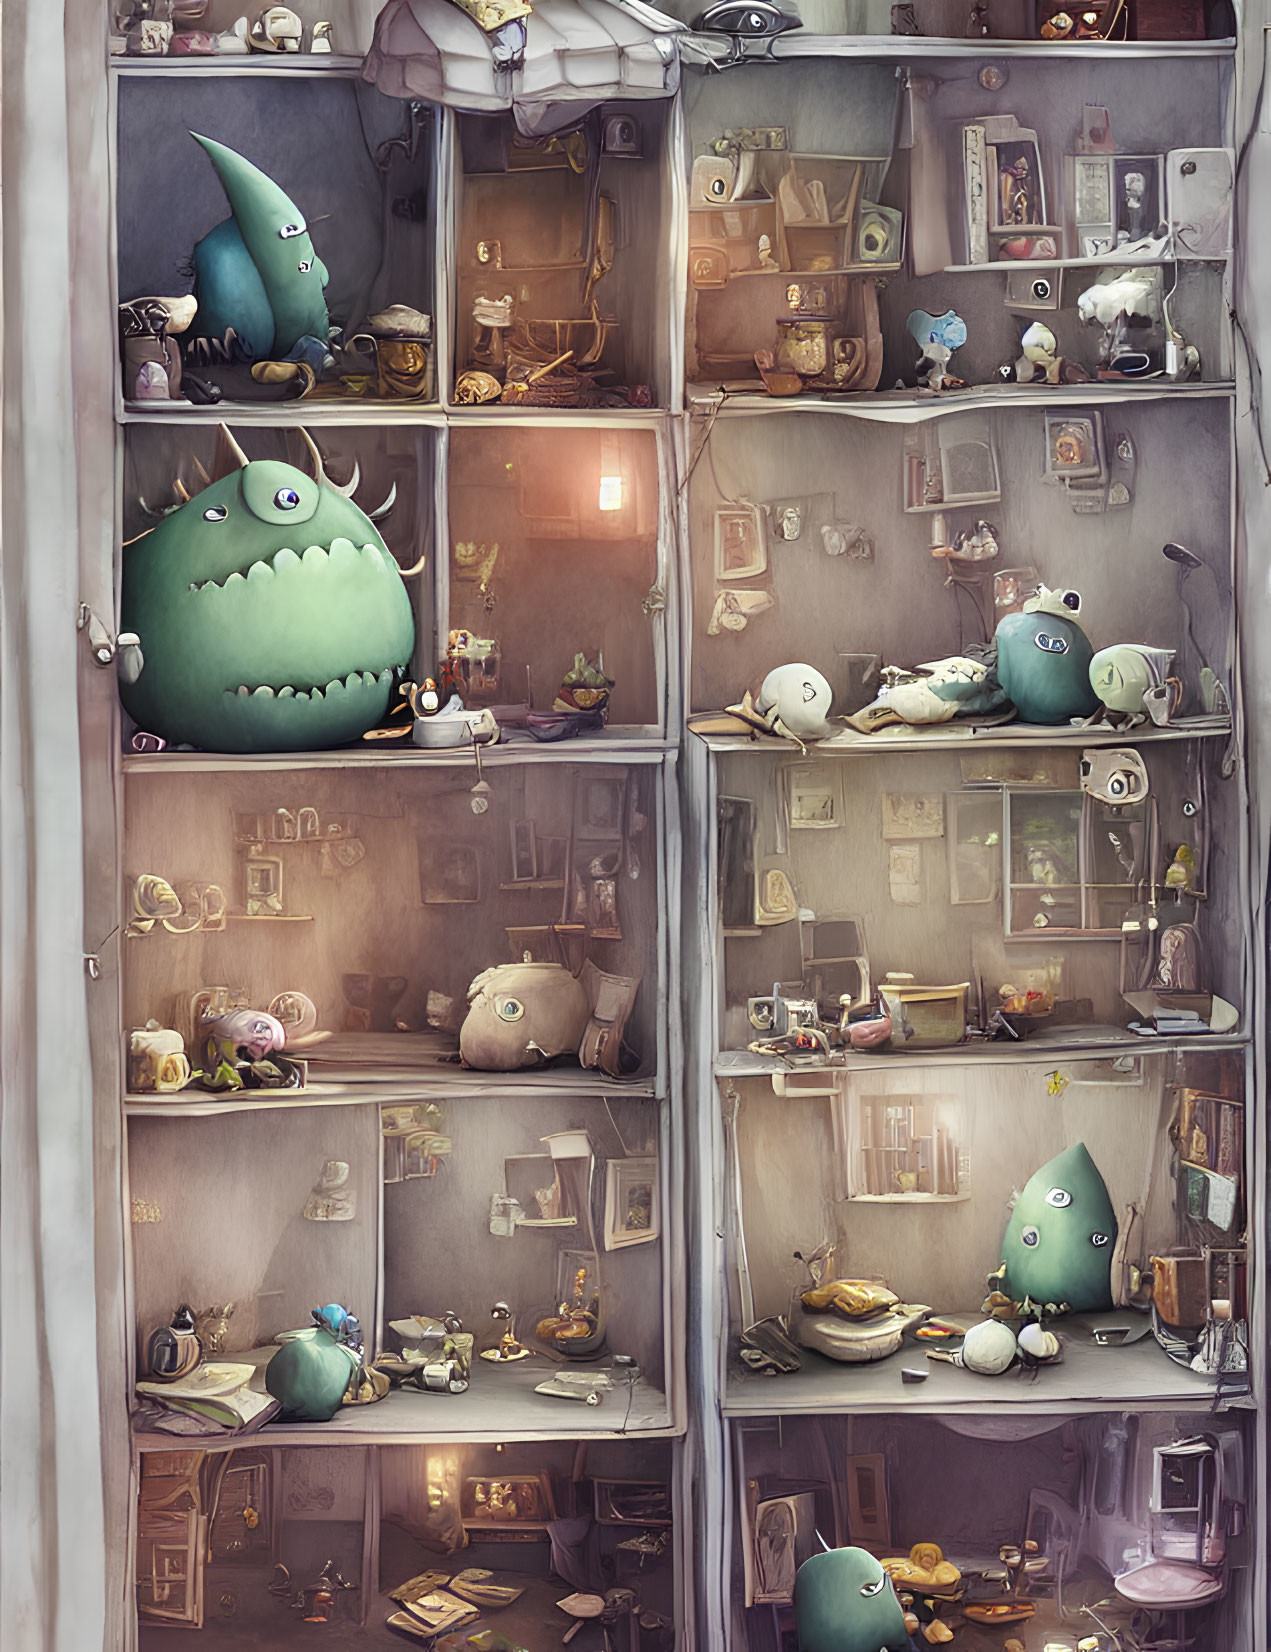 Illustrated multi-story building cutaway with green creatures in whimsical scenes